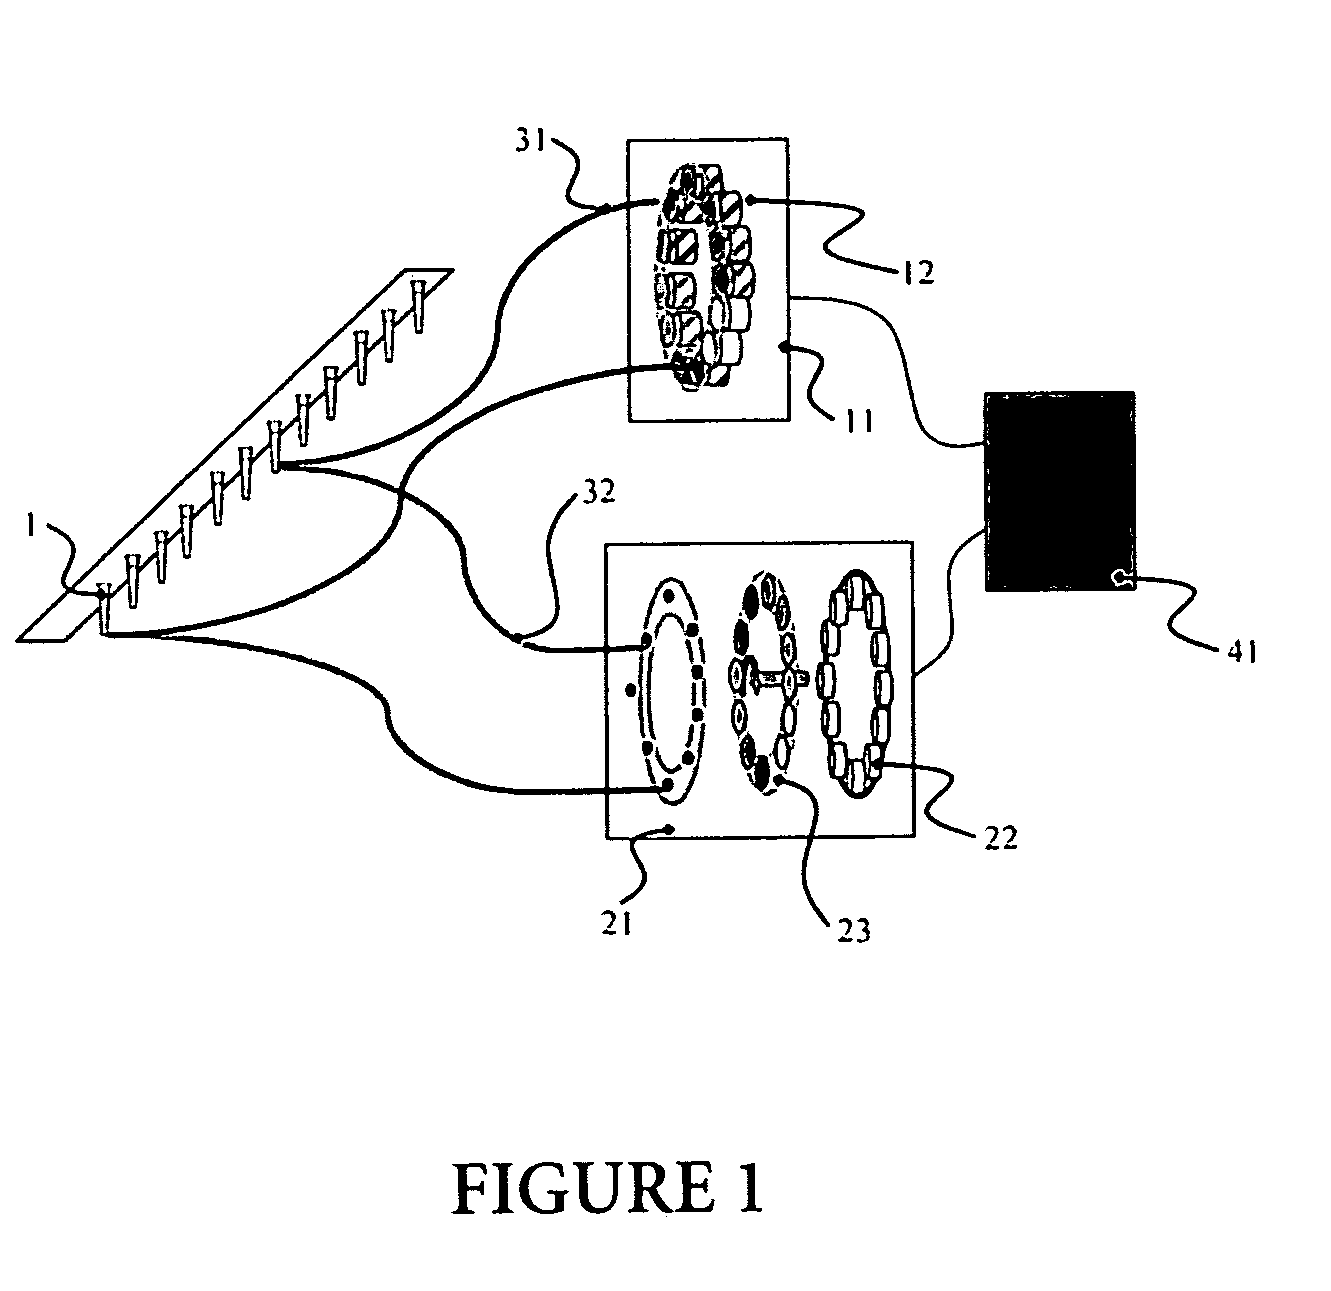 Apparatus for emitting and detecting light in a nucleic acid amplification reaction